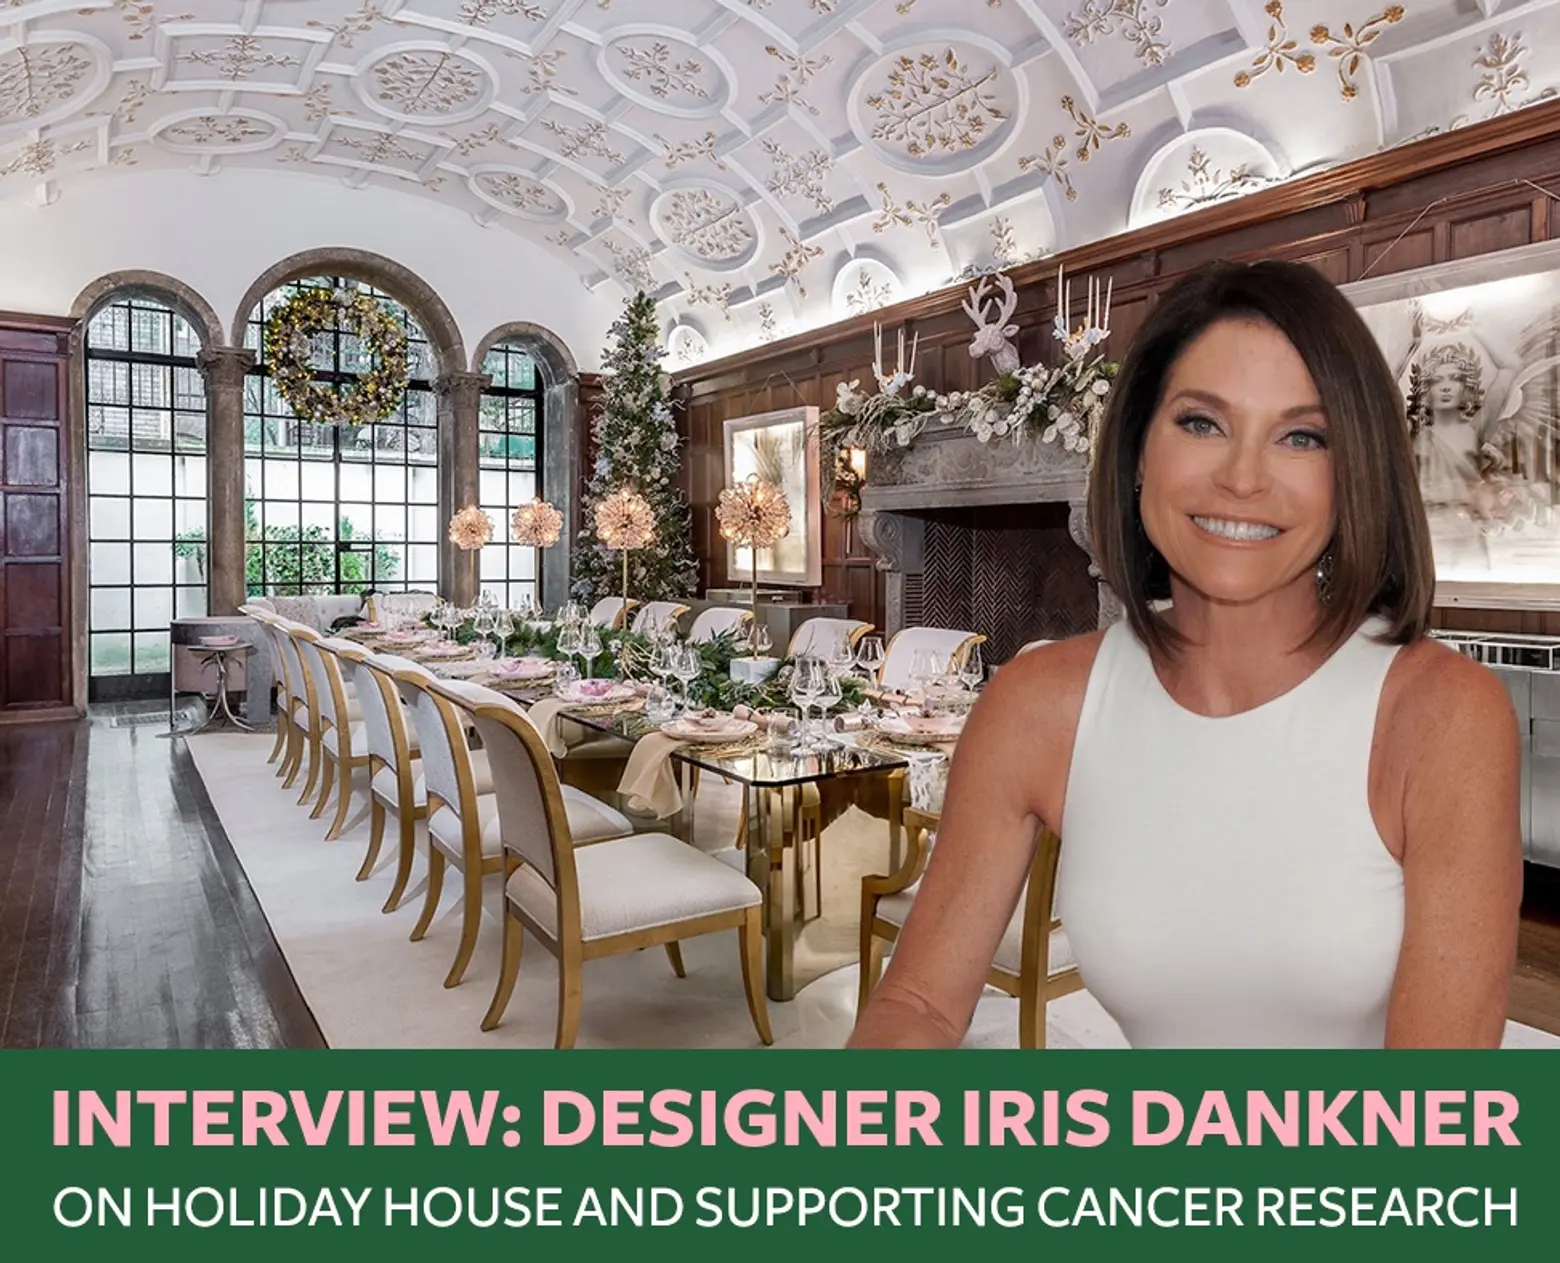 INTERVIEW: Holiday House founder Iris Dankner supports cancer research through interior design